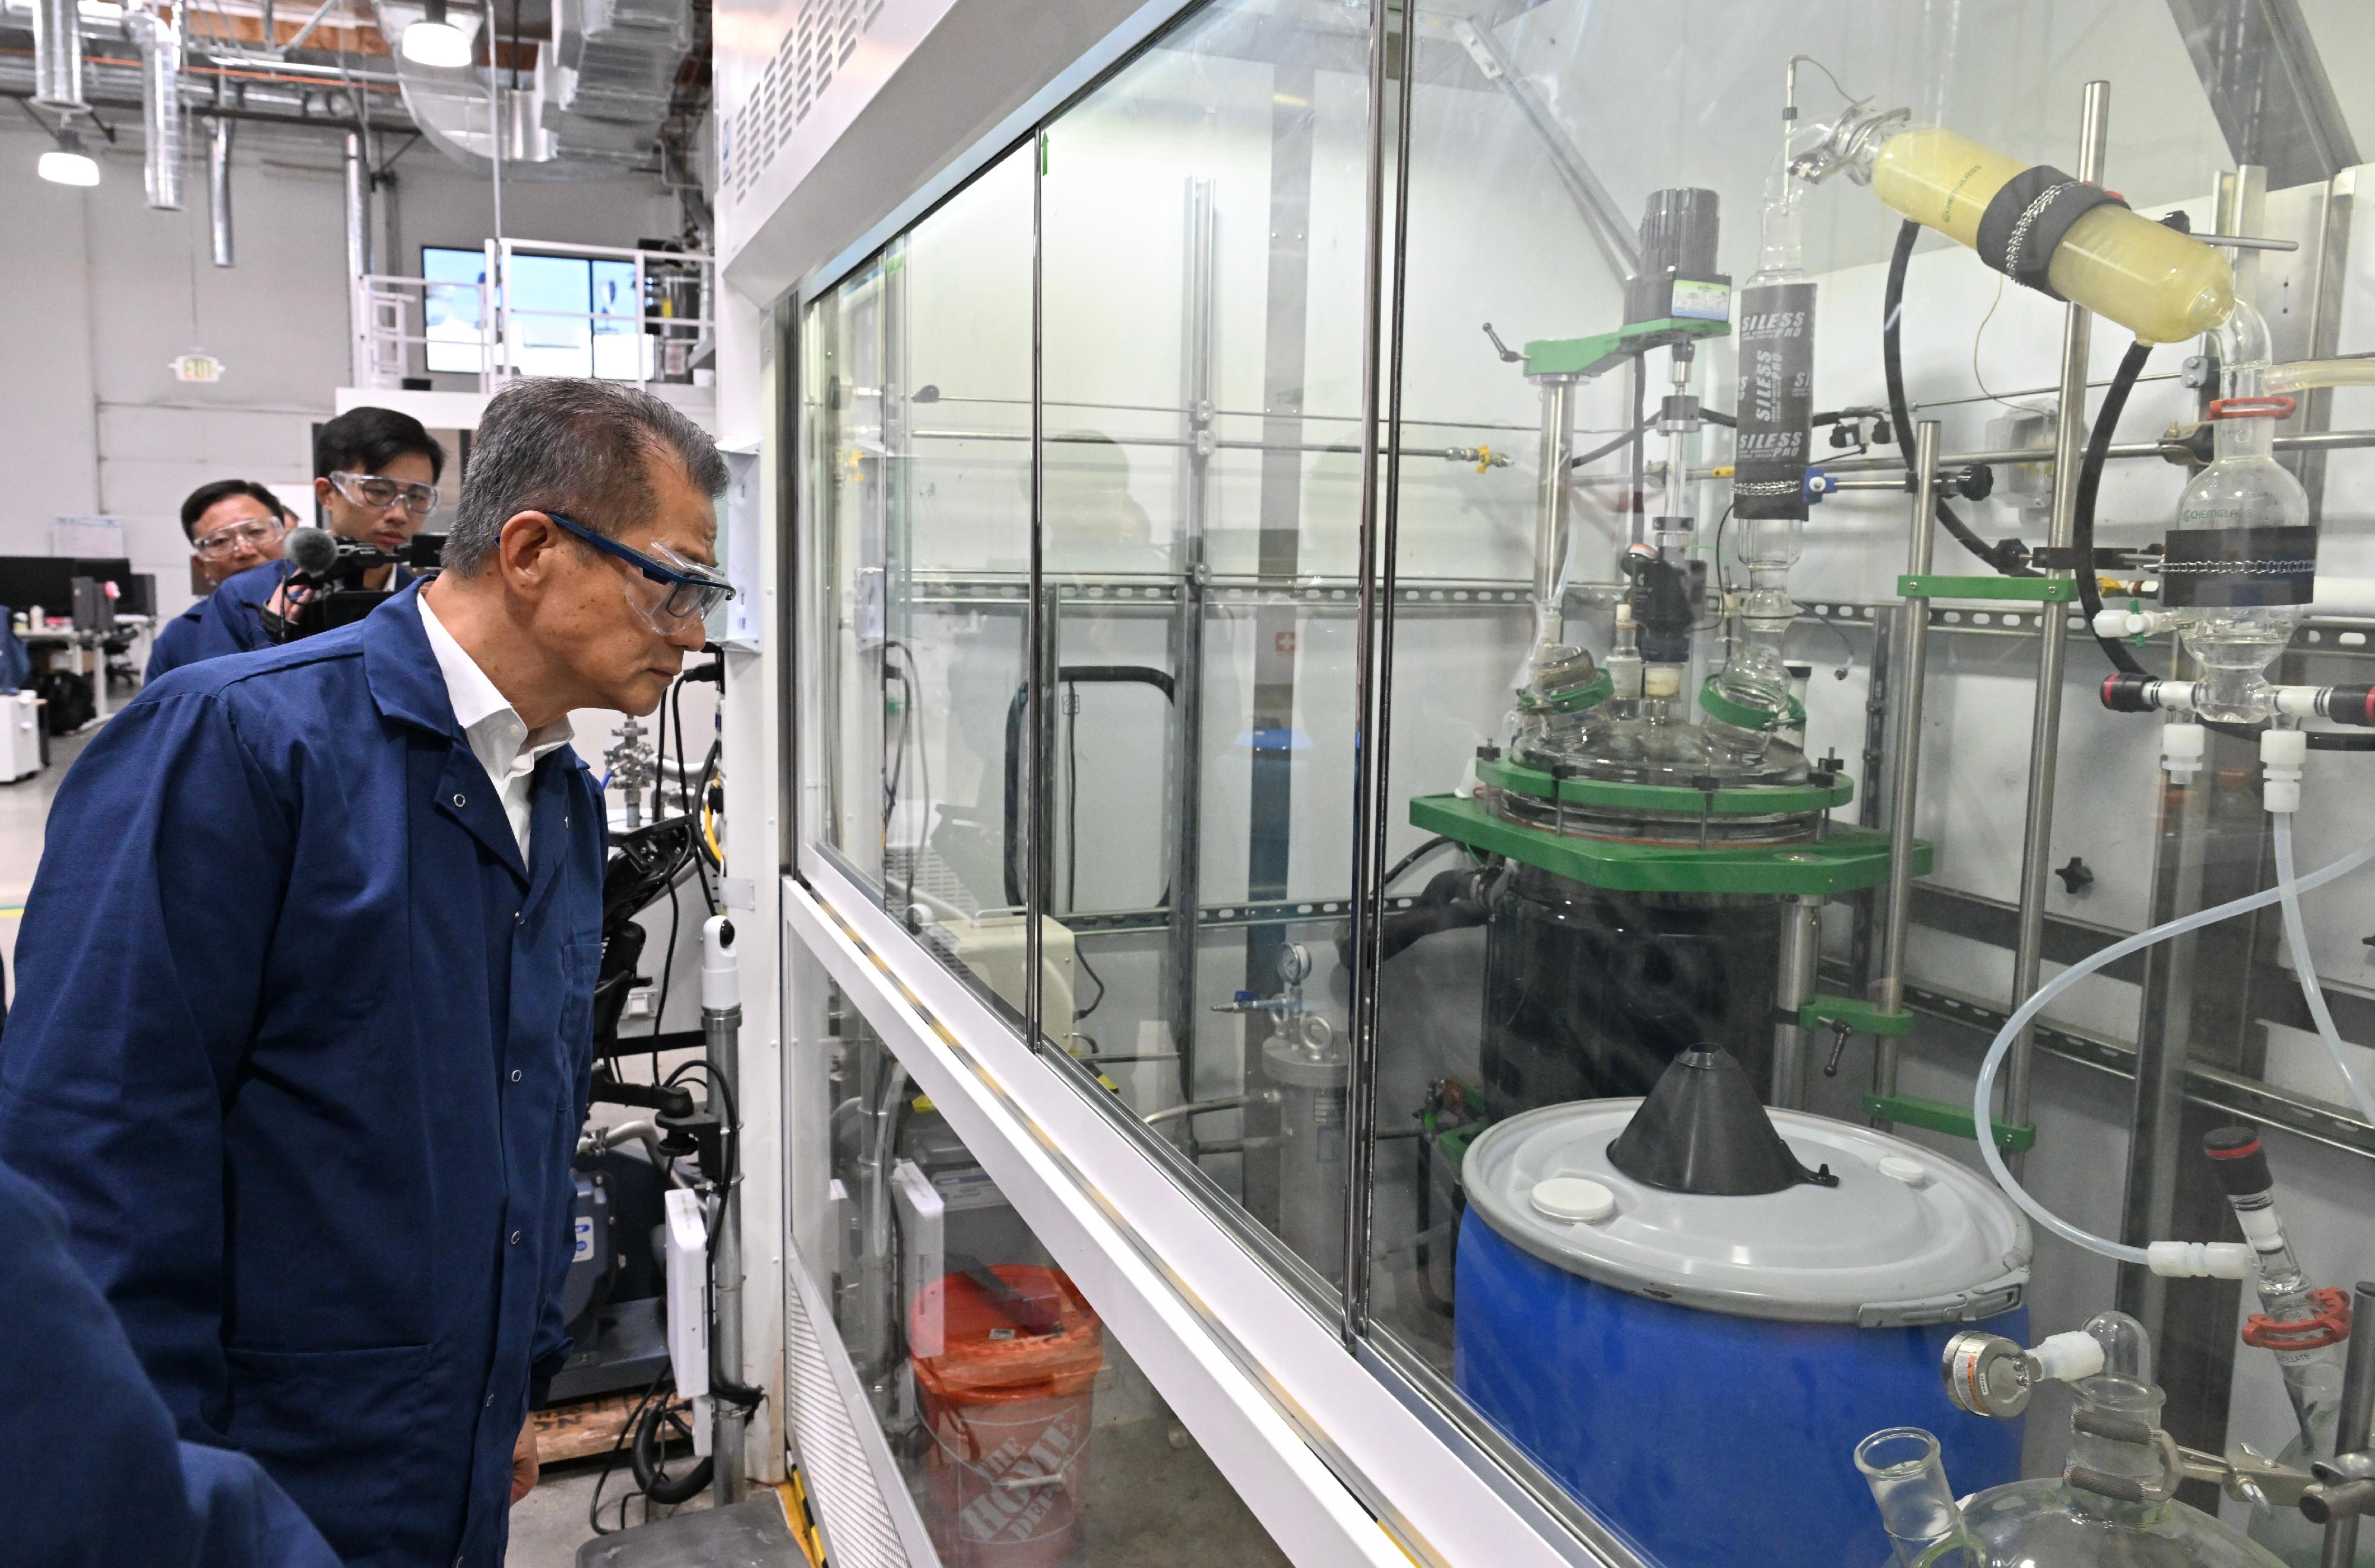 The Financial Secretary, Mr Paul Chan, visited a technology company engaged in plastic materials recycling for reuse in San Francisco, the United States, on May 30 (California time). Photo shows Mr Chan visiting the research and development plant.